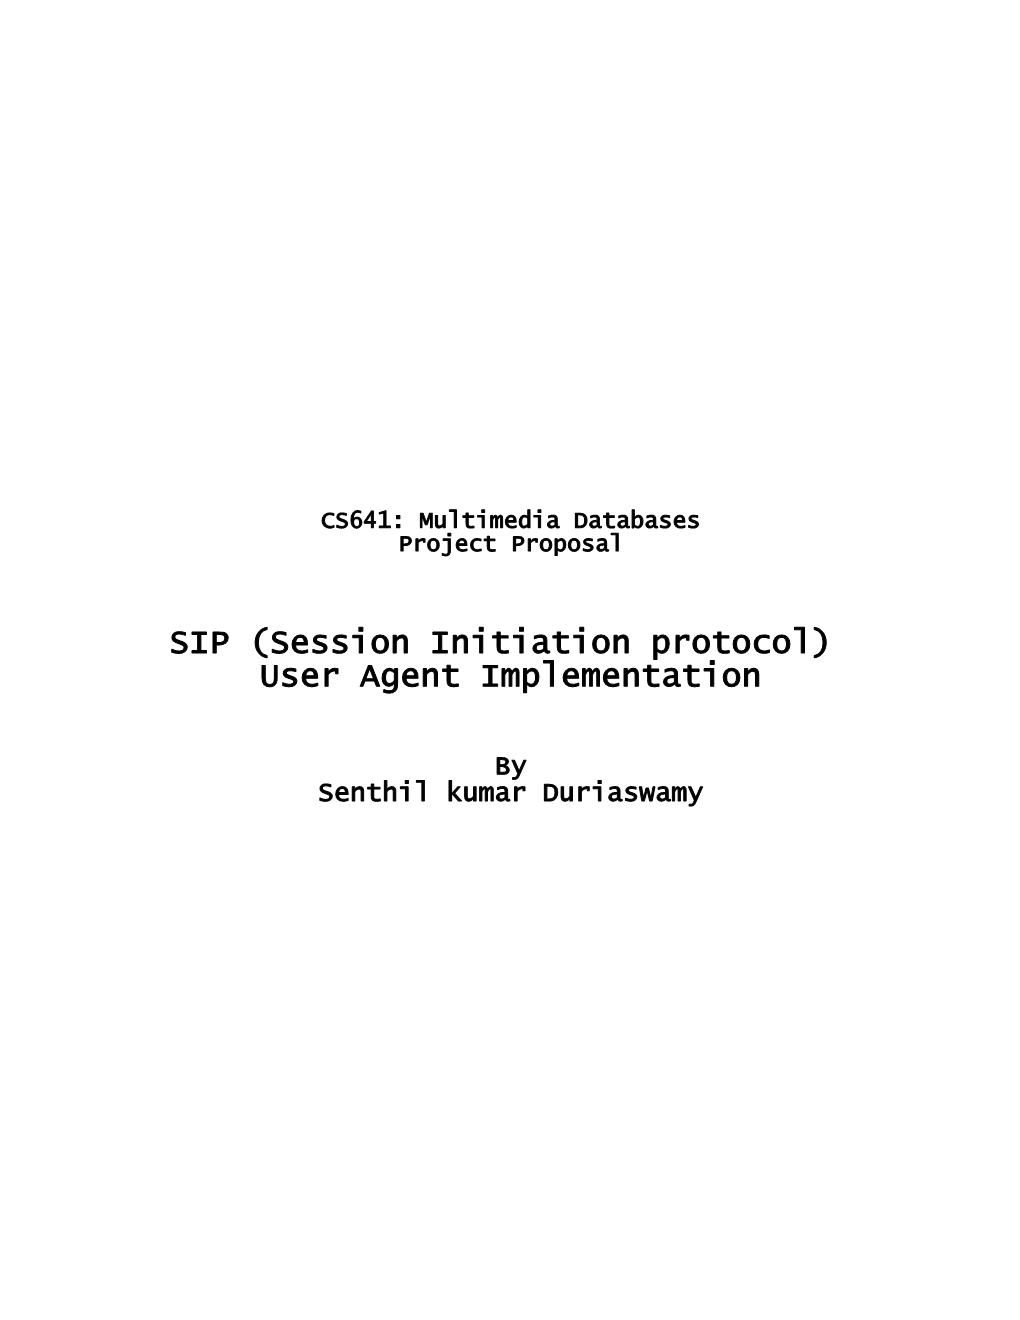 Session Initiation Protocol (SIP) Is the Internet Engineering Task Force S (IETF S) Standard